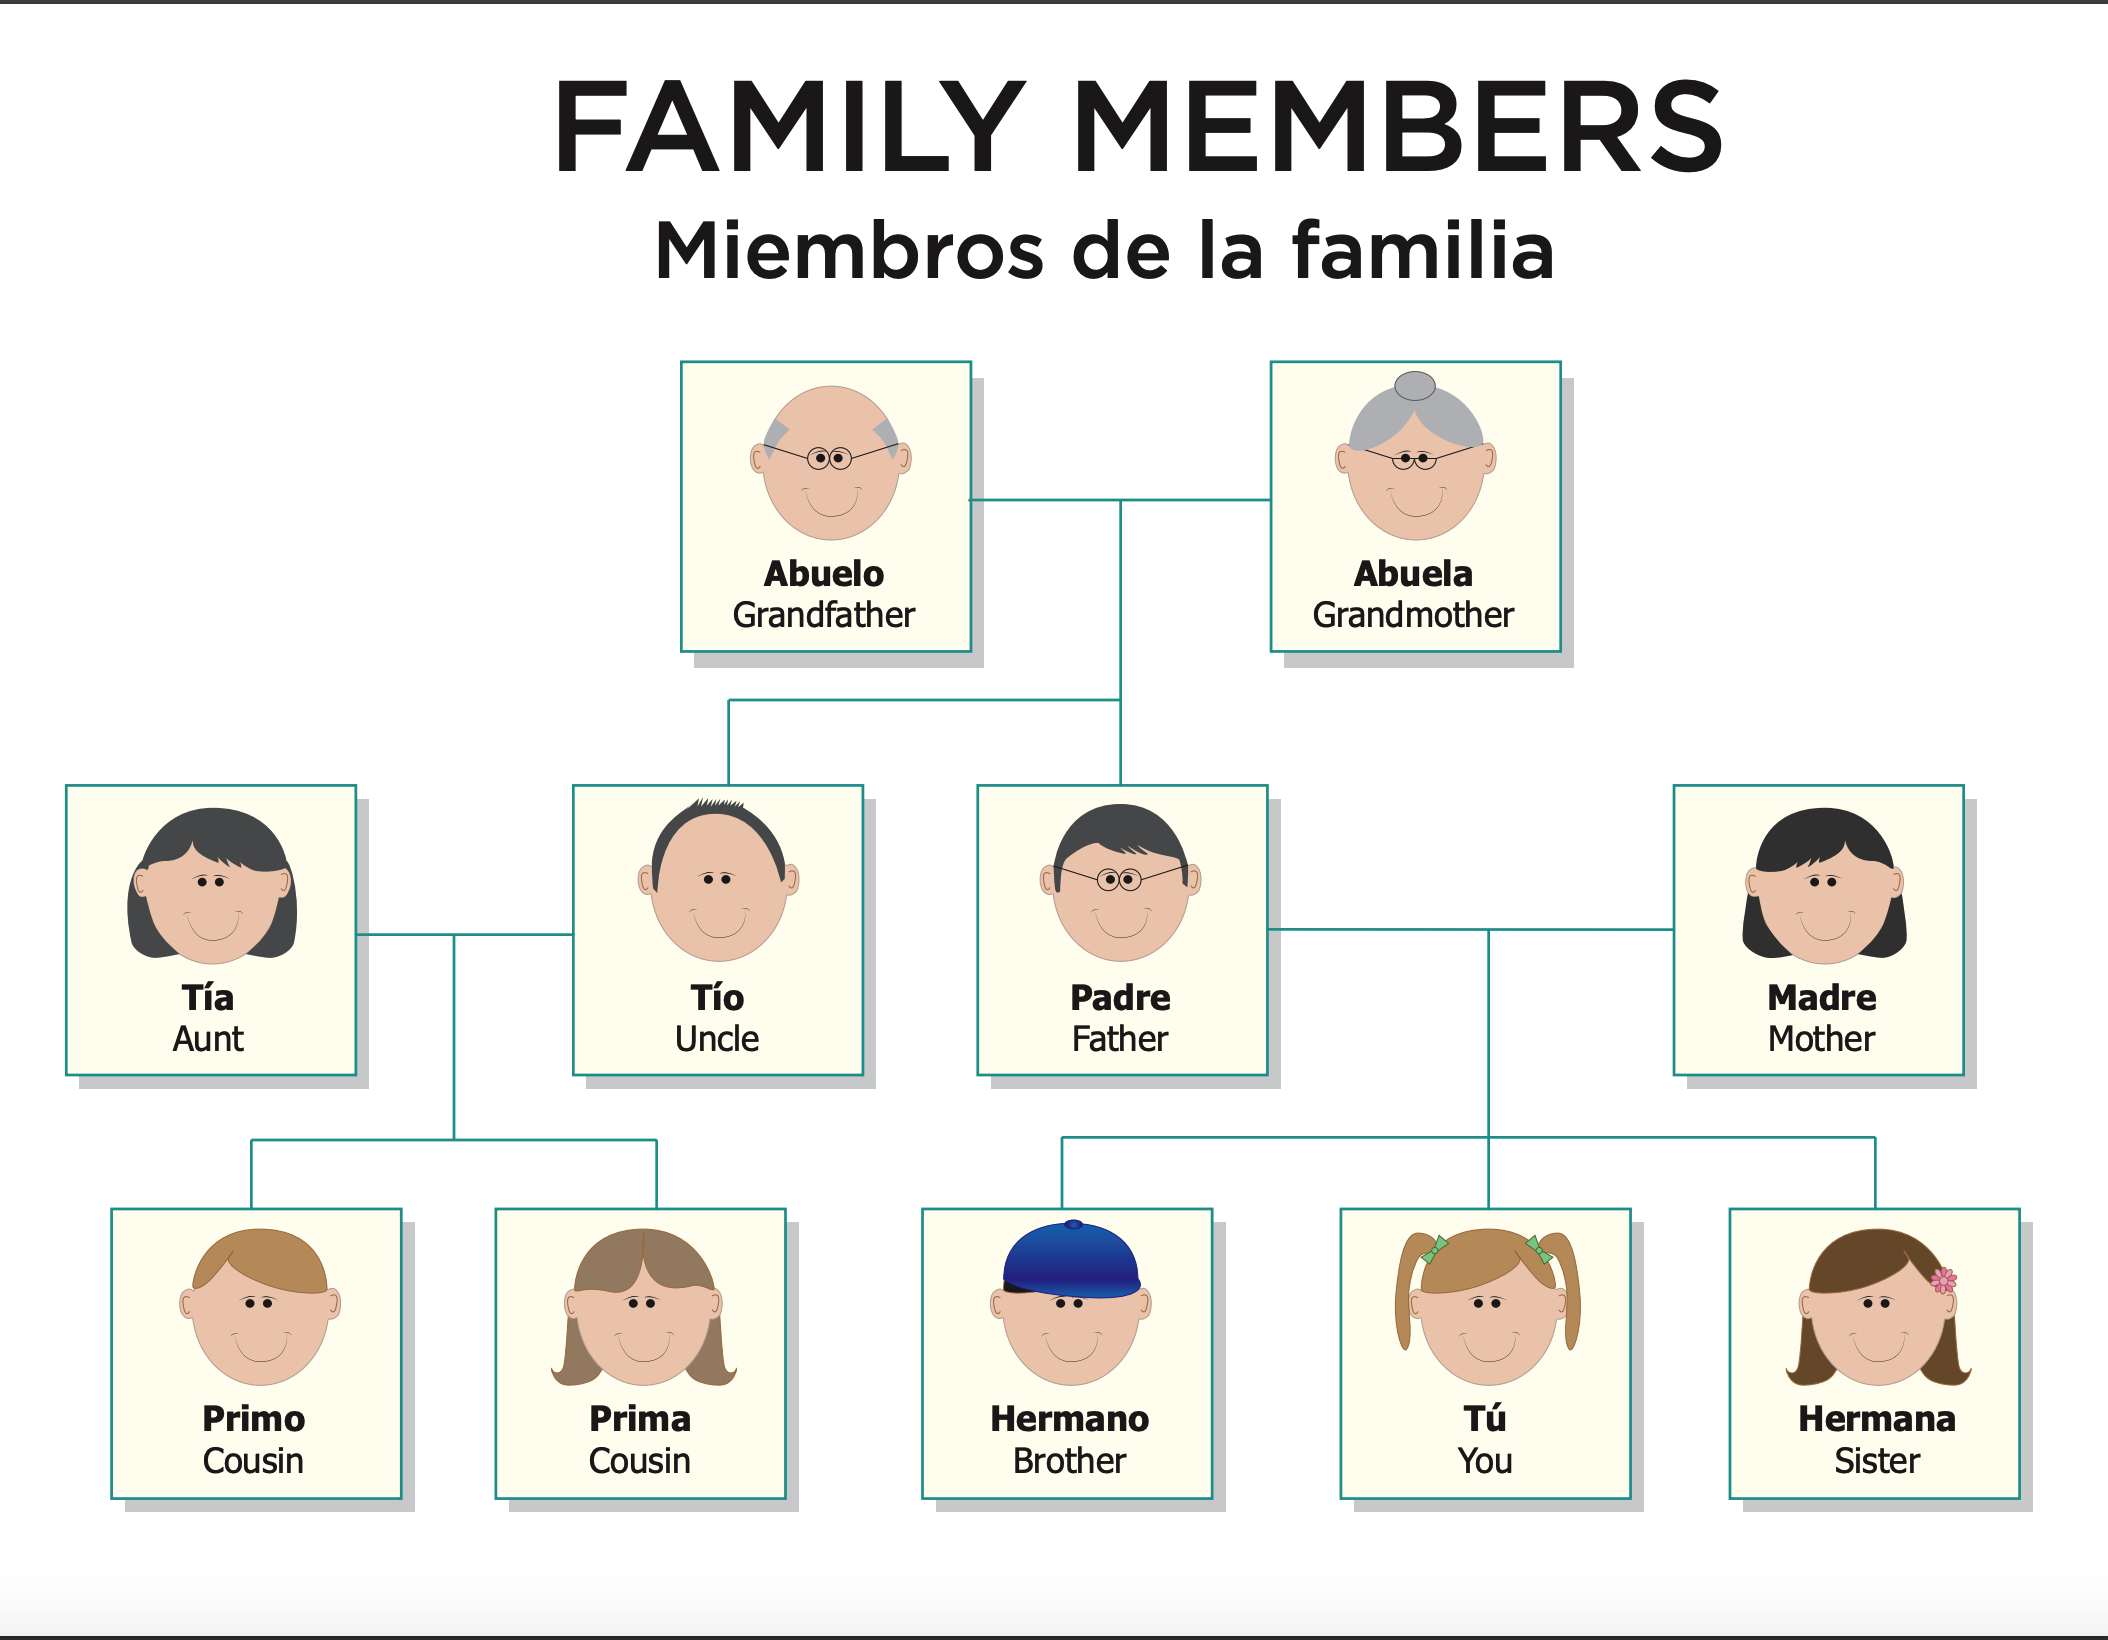 Member answers. A member of the Family. Семья на английском. Карточки Family members.